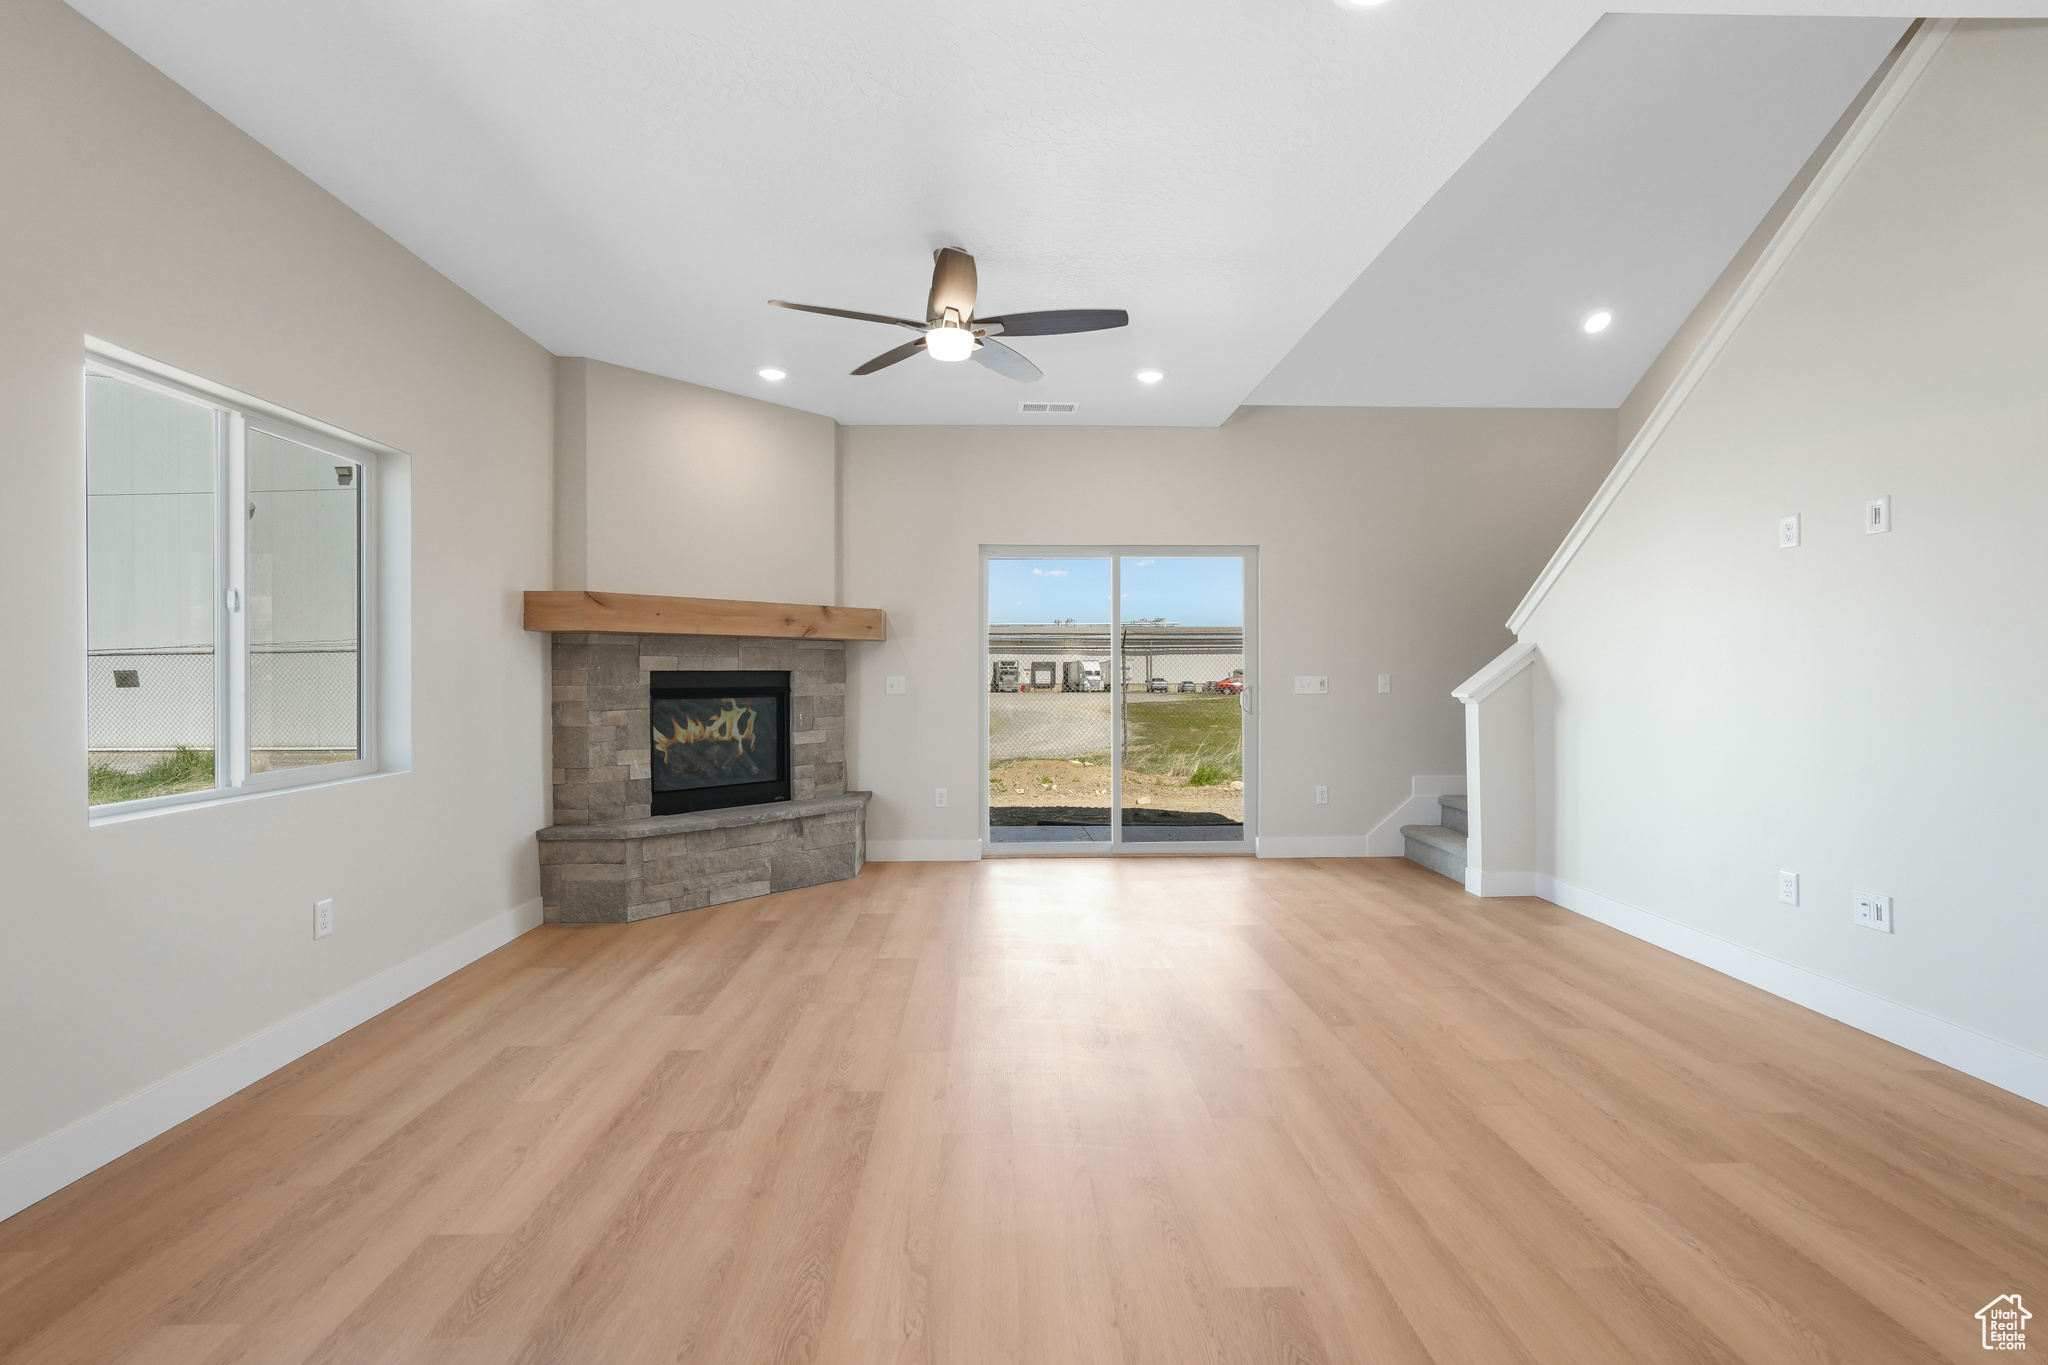 Unfurnished living room featuring plenty of natural light, light hardwood / wood-style floors, ceiling fan, and a fireplace